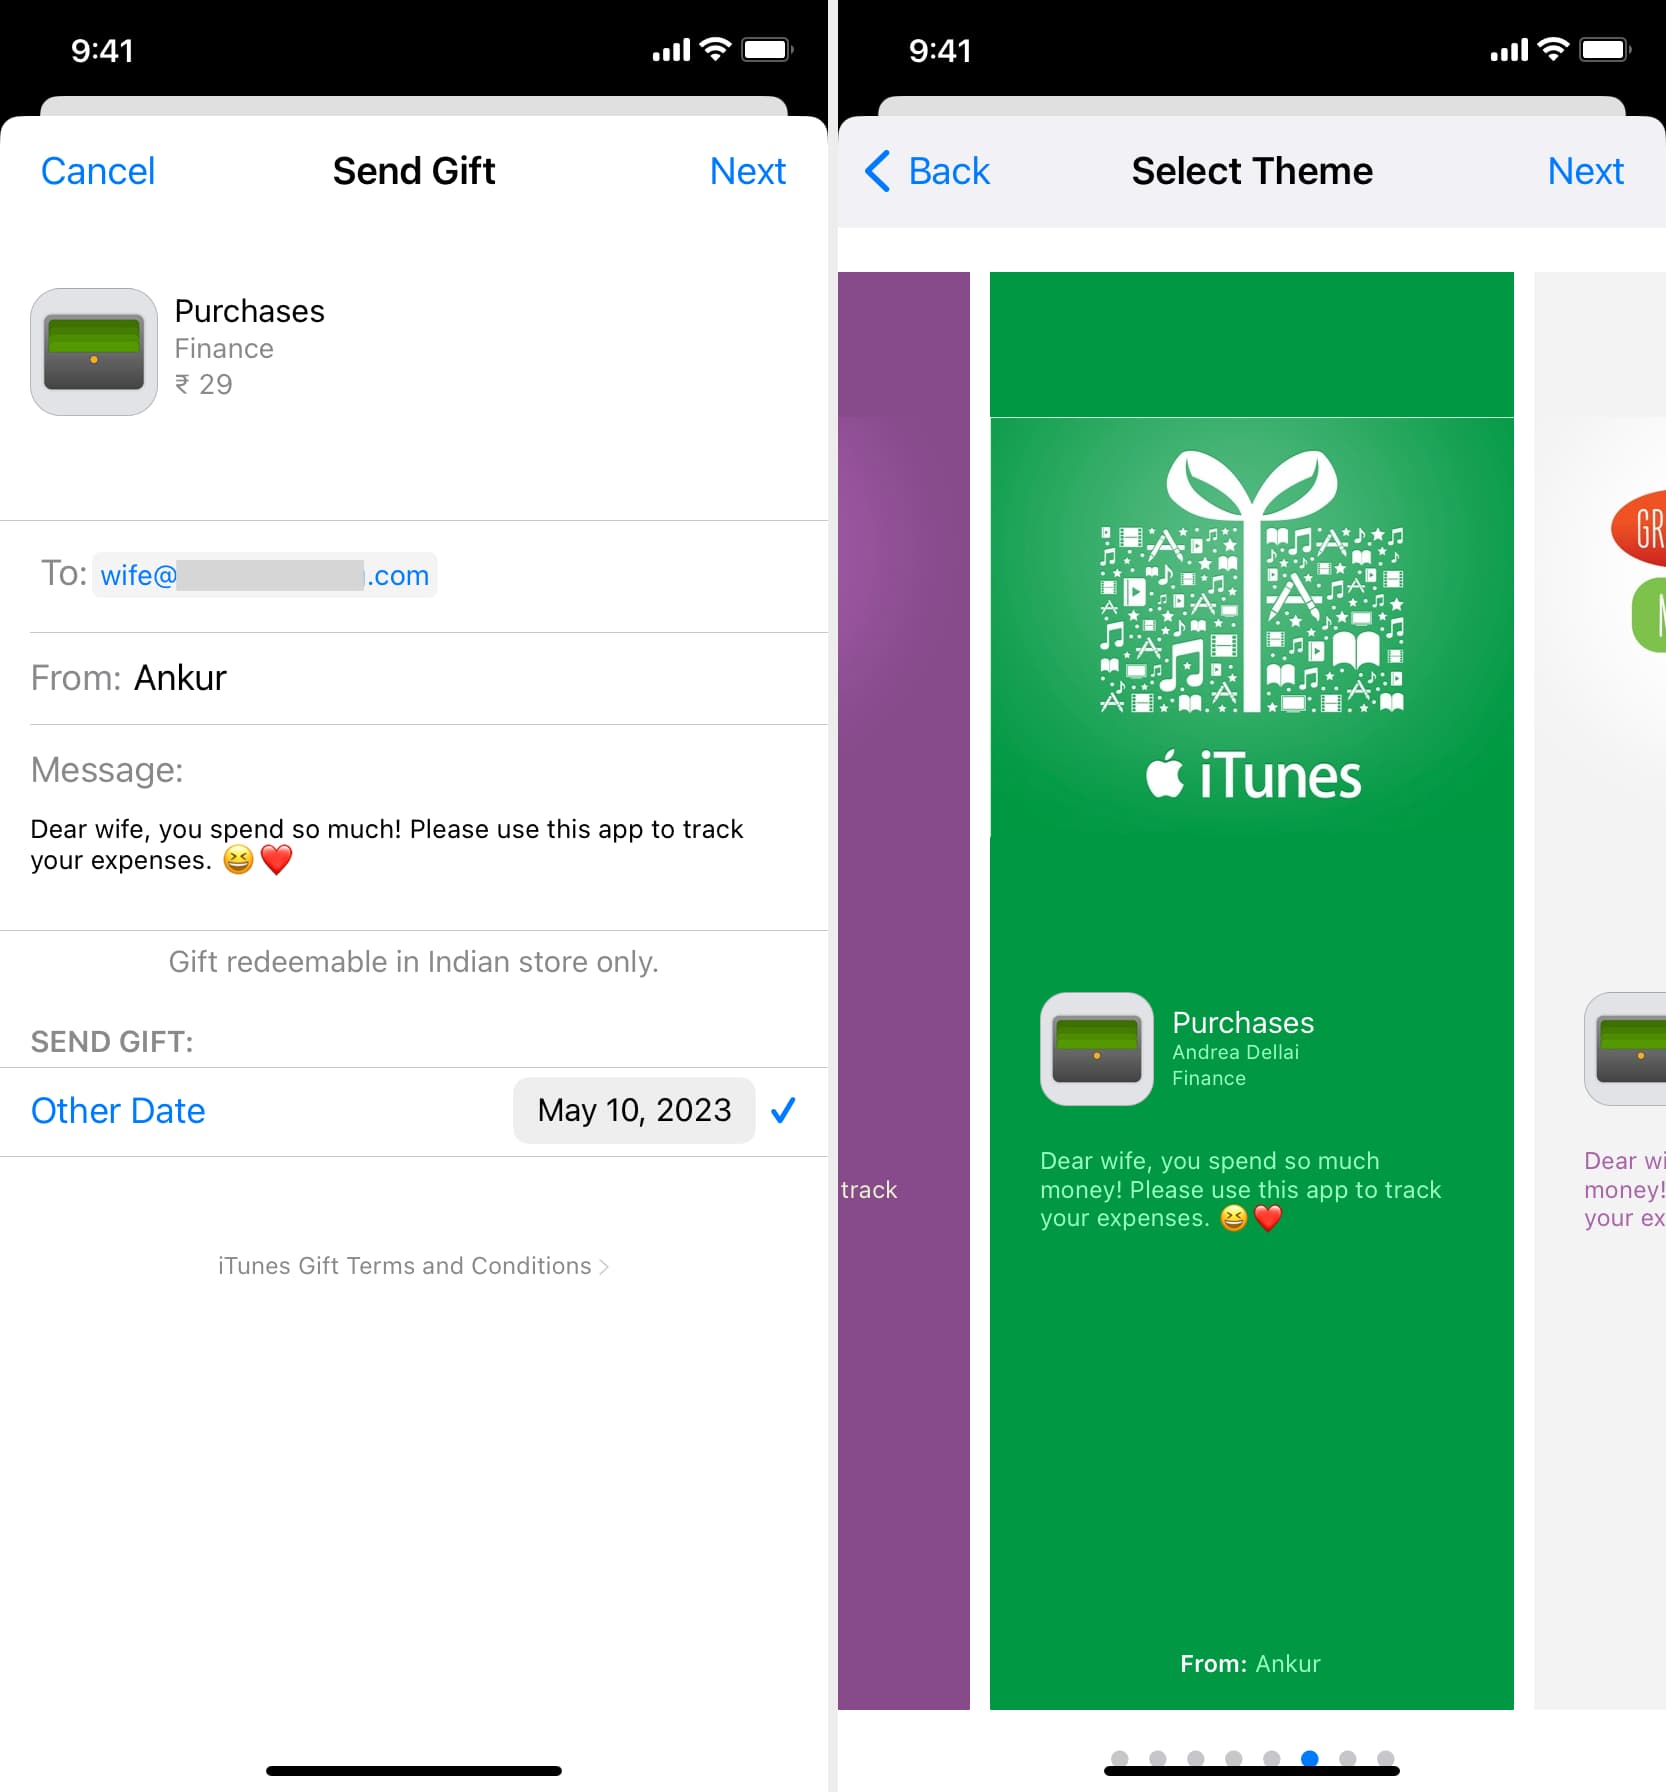 Personalize your gift and pick theme on iPhone